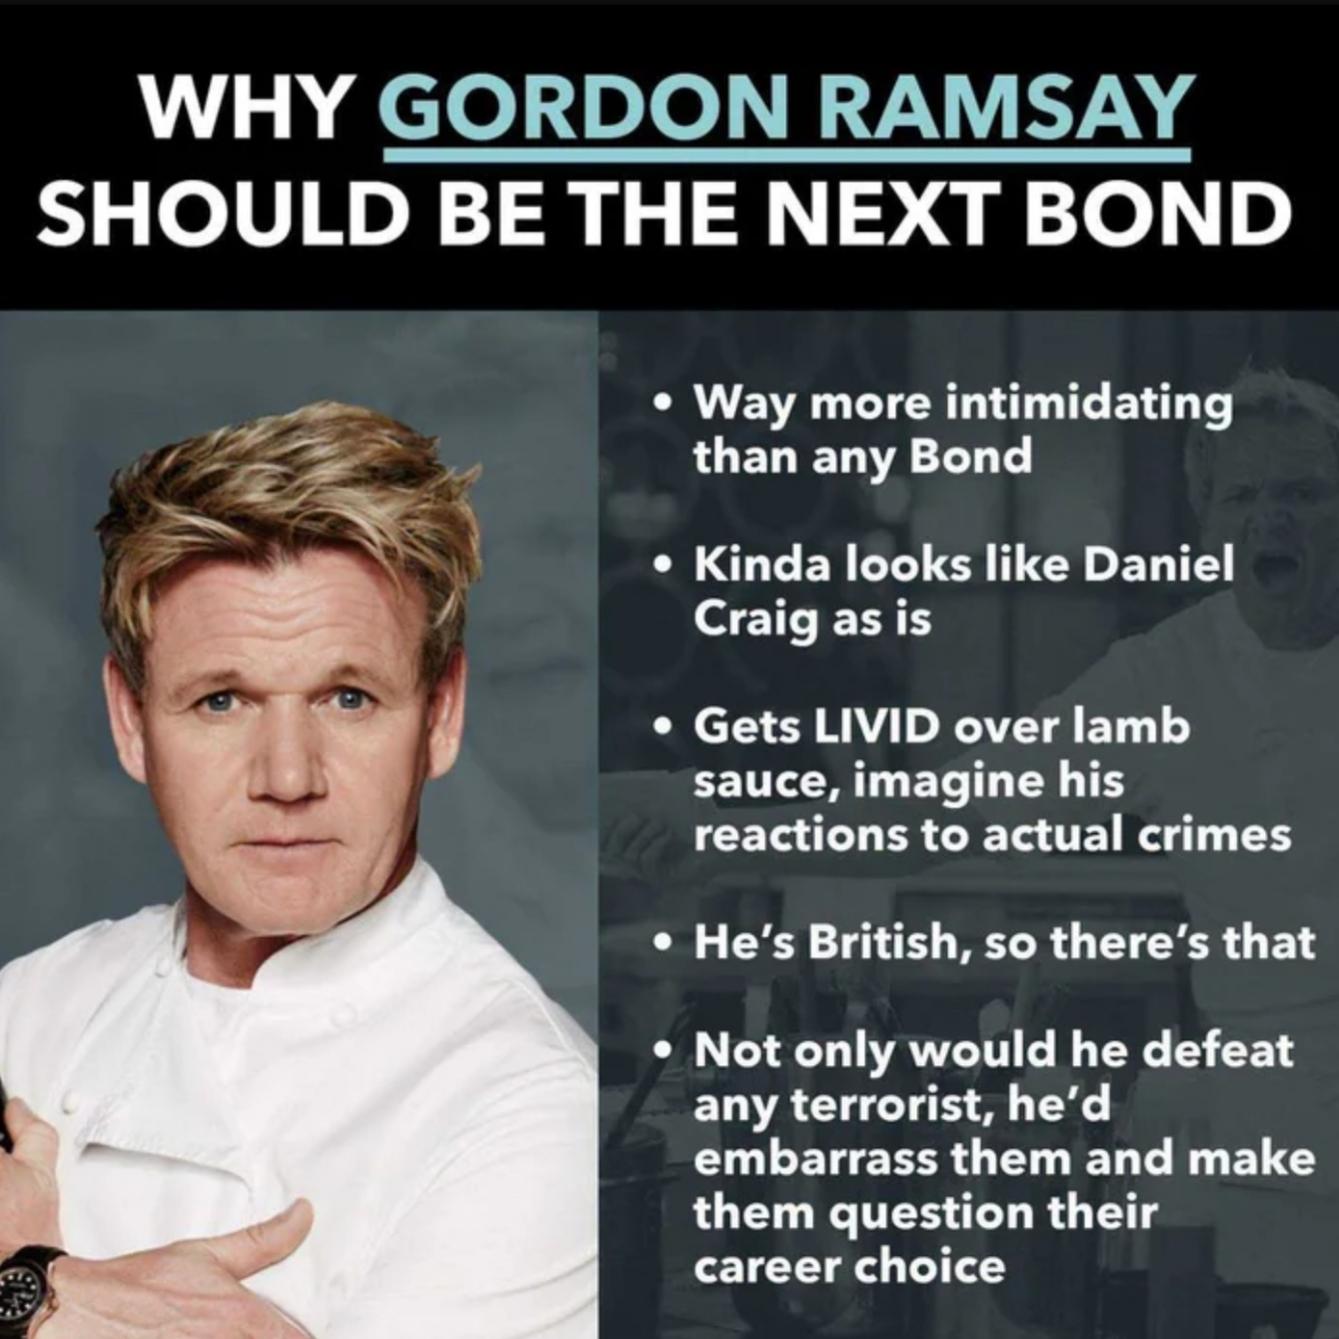 gordon ramsay james bond - Why Gordon Ramsay Should Be The Next Bond Way more intimidating than any Bond Kinda looks Daniel Craig as is Gets Livid over lamb sauce, imagine his reactions to actual crimes He's British, so there's that Not only would he defe